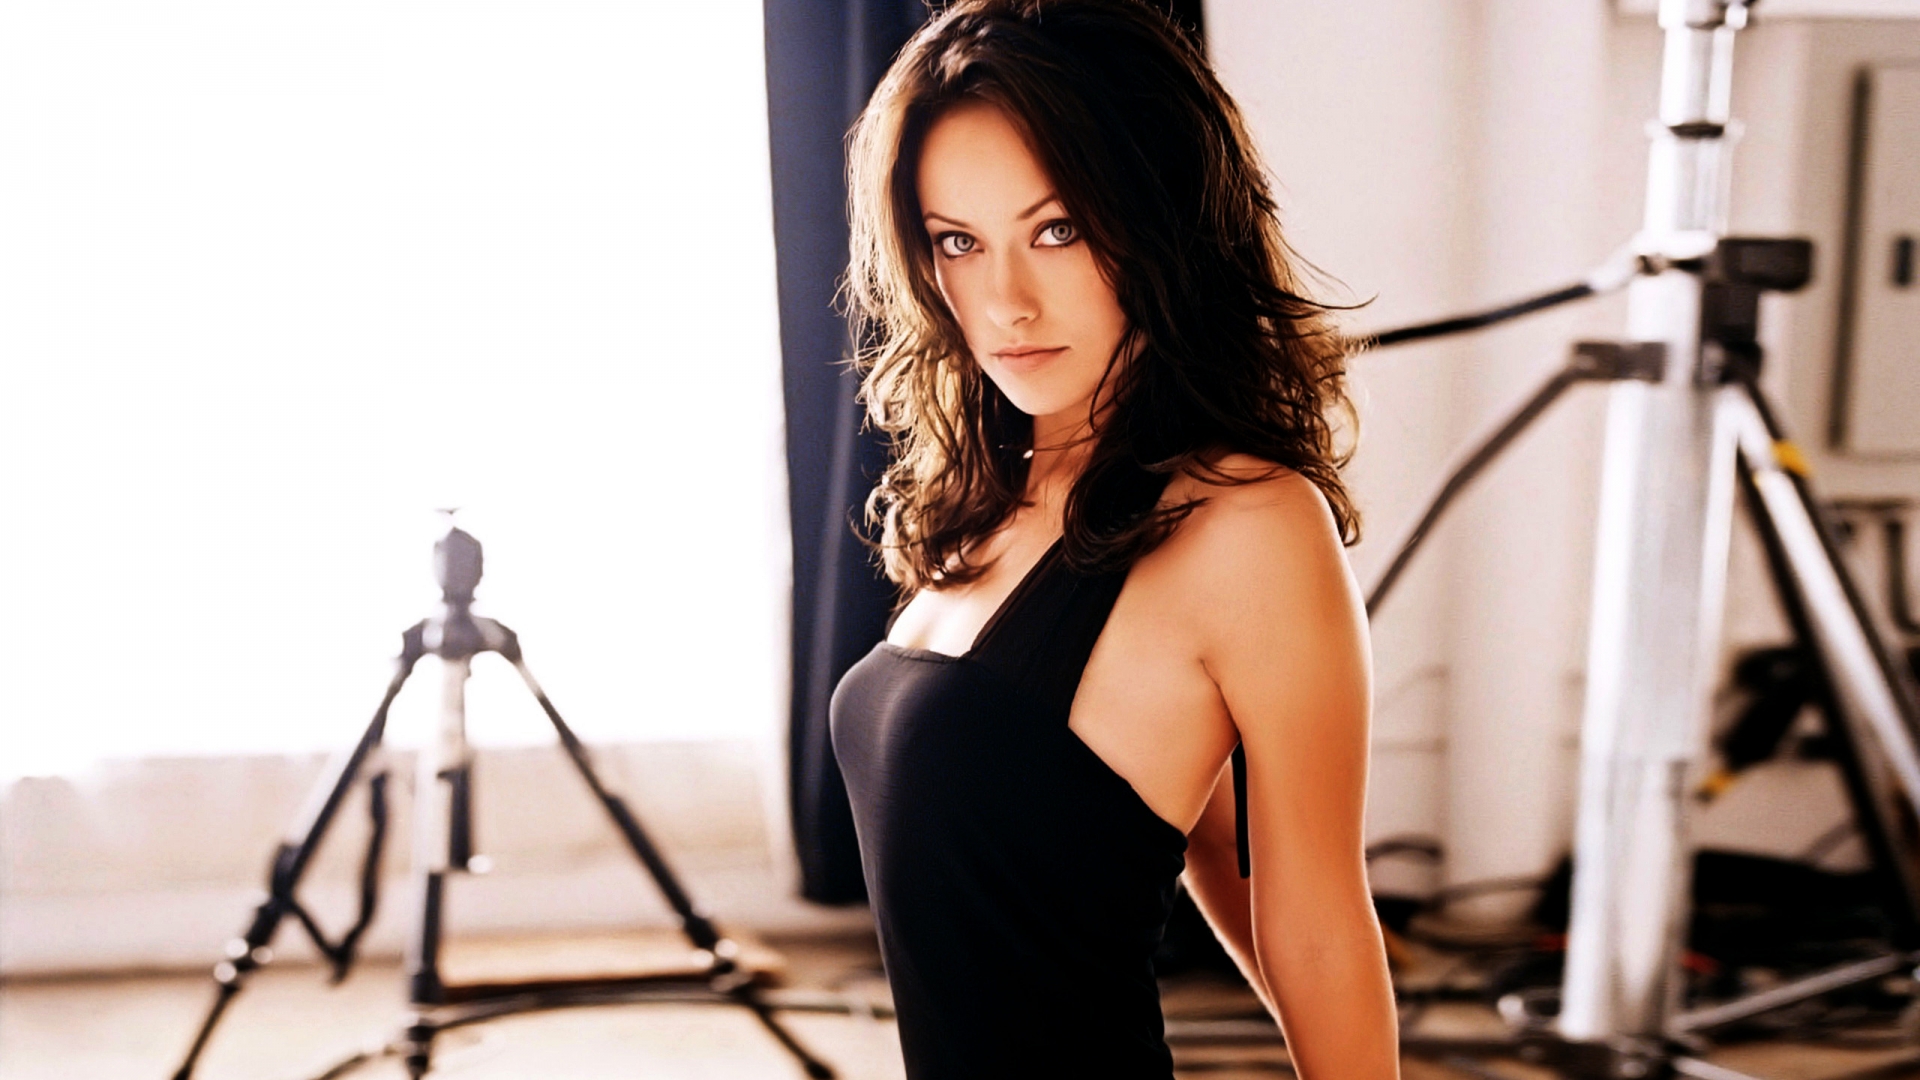 Olivia Wilde Serious Look for 1920 x 1080 HDTV 1080p resolution